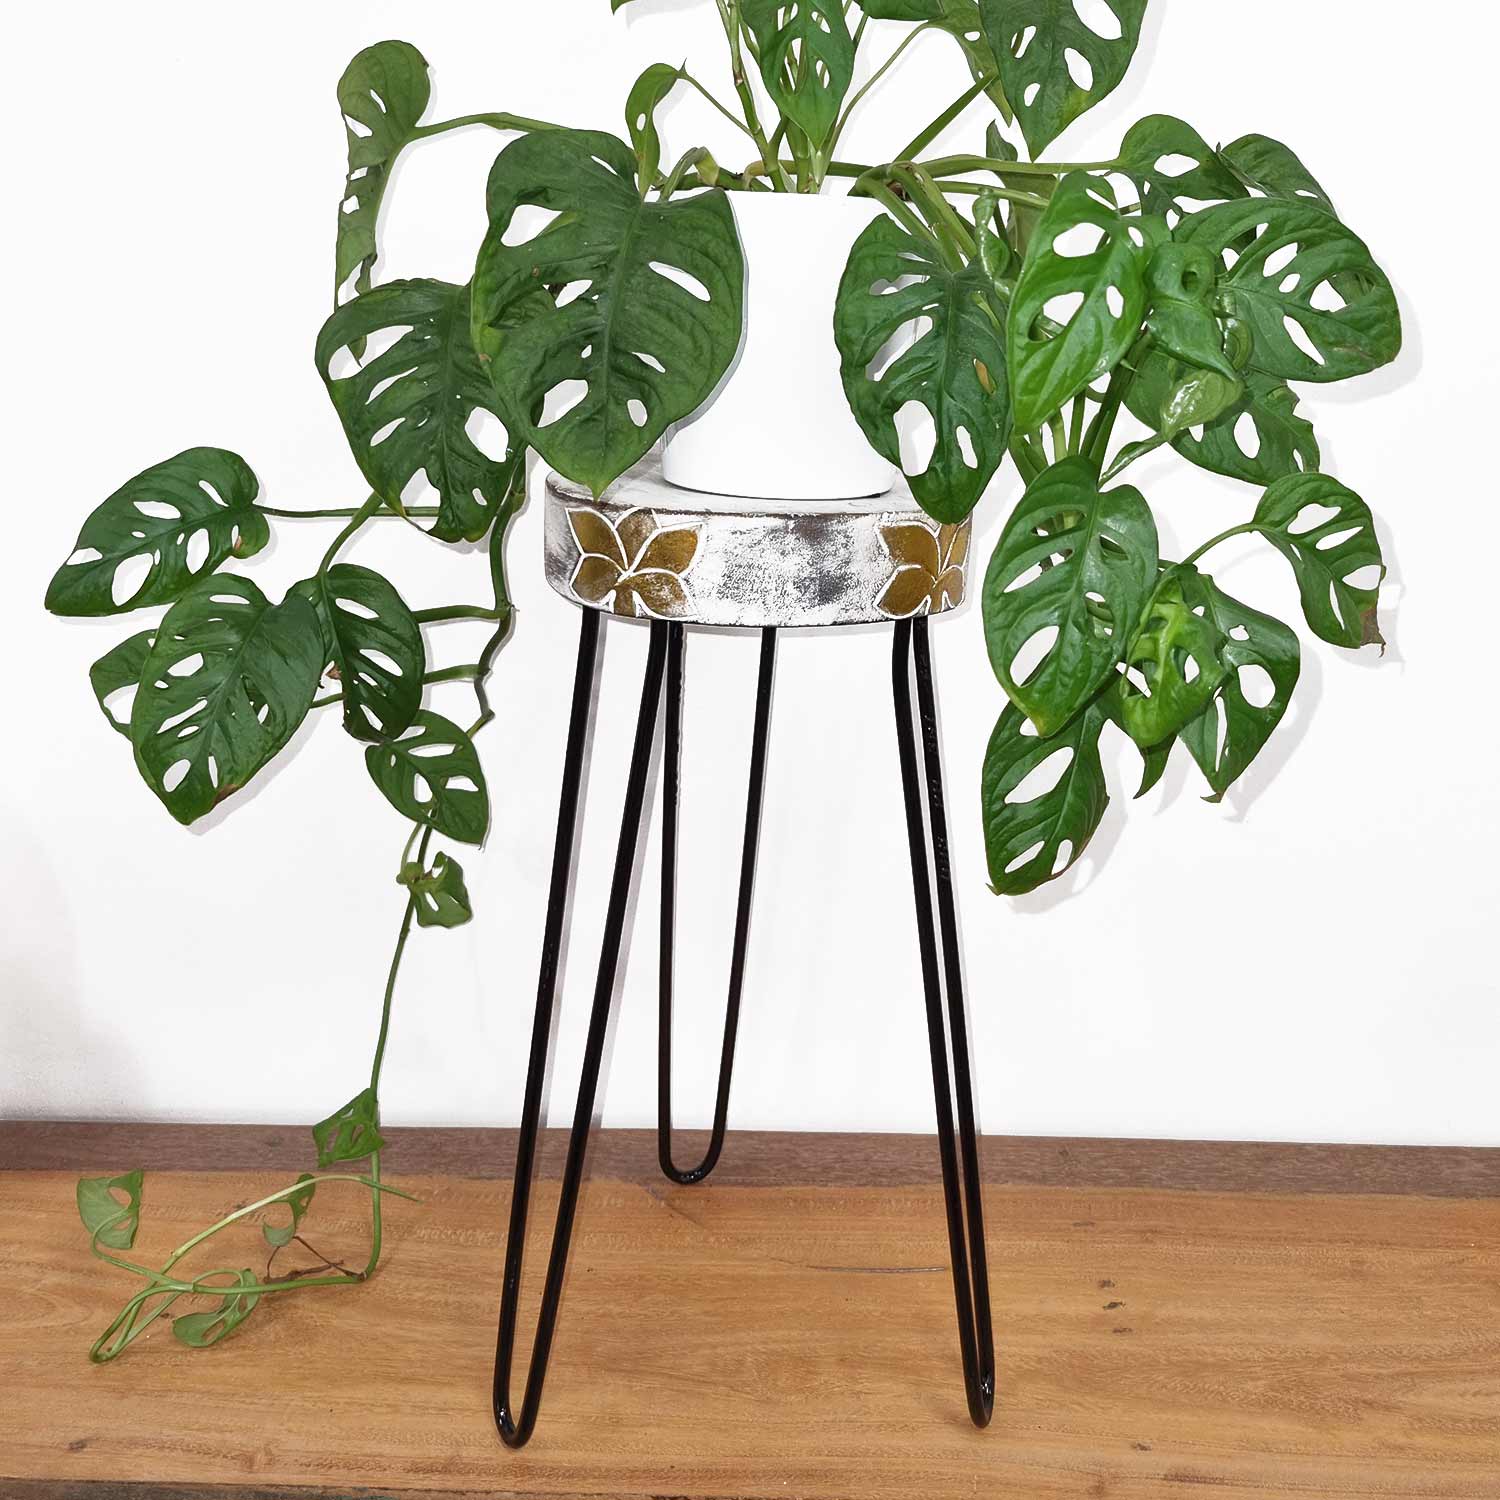 Albasia Wood Plant Stands - ShopGreenToday